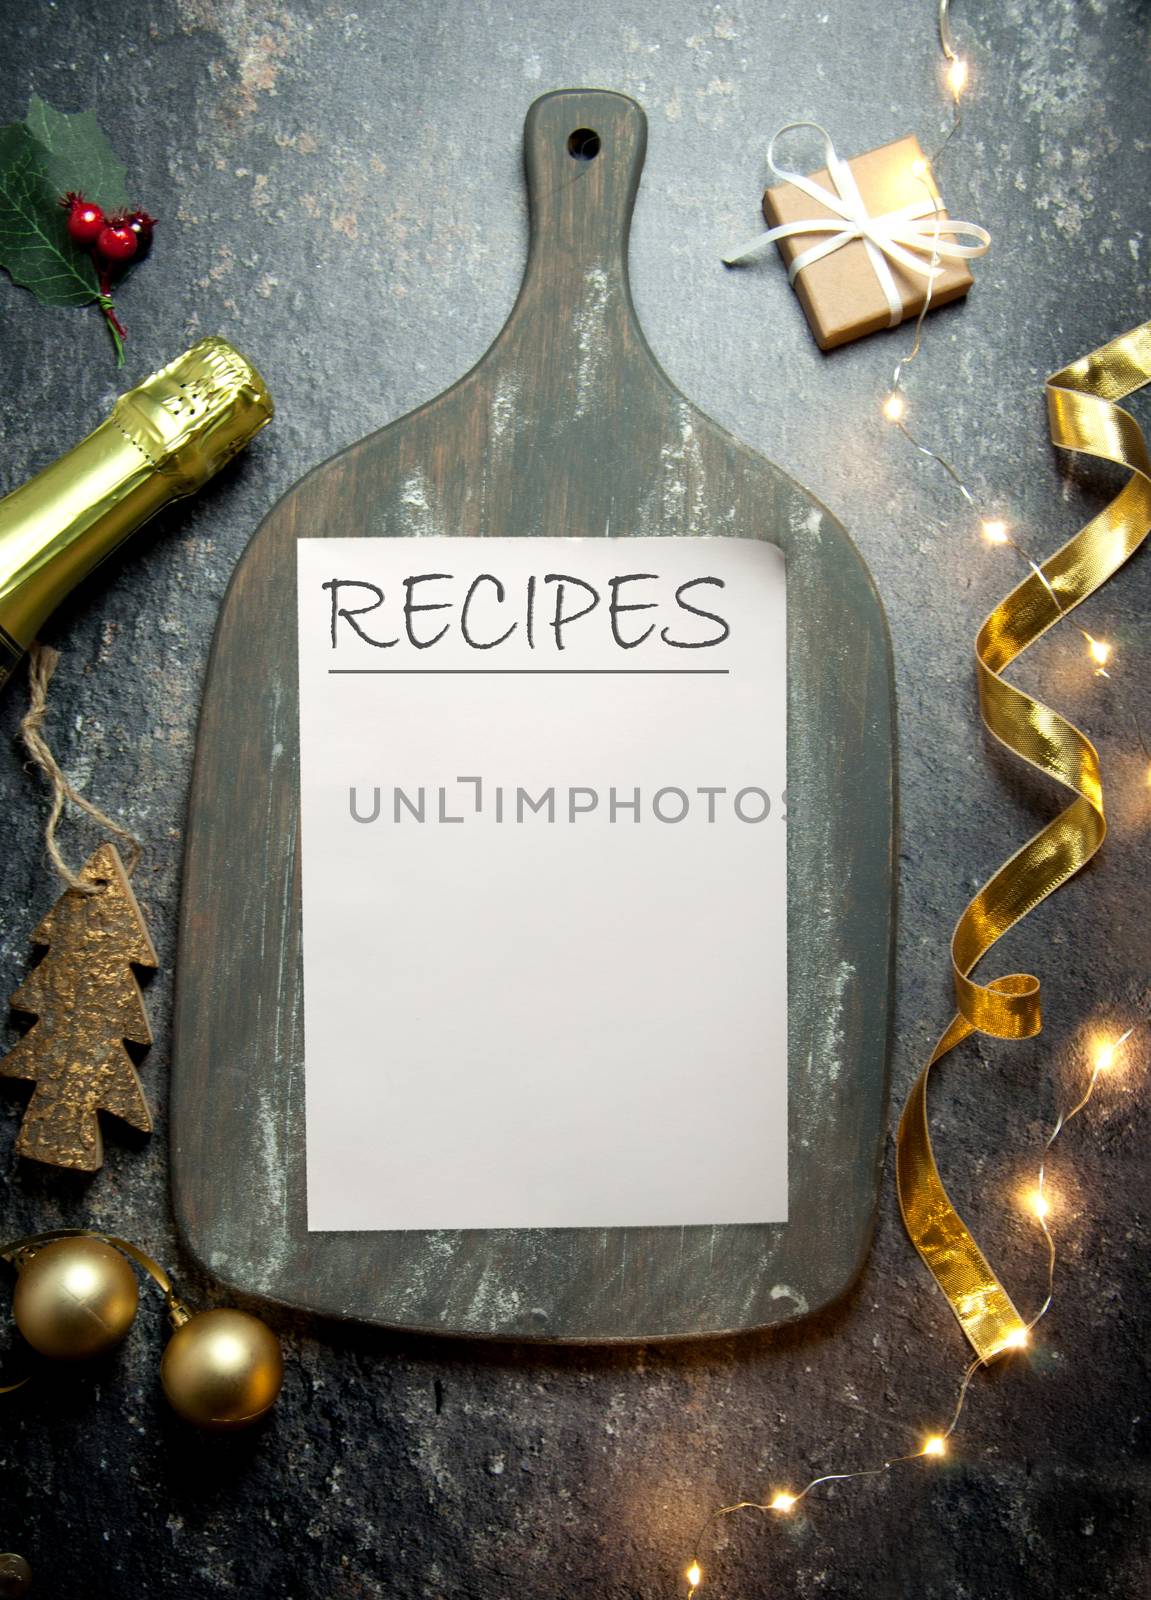 Recipes handwitten on a piece of paper on top of a rustic chopping board with decorations and champagne bottle